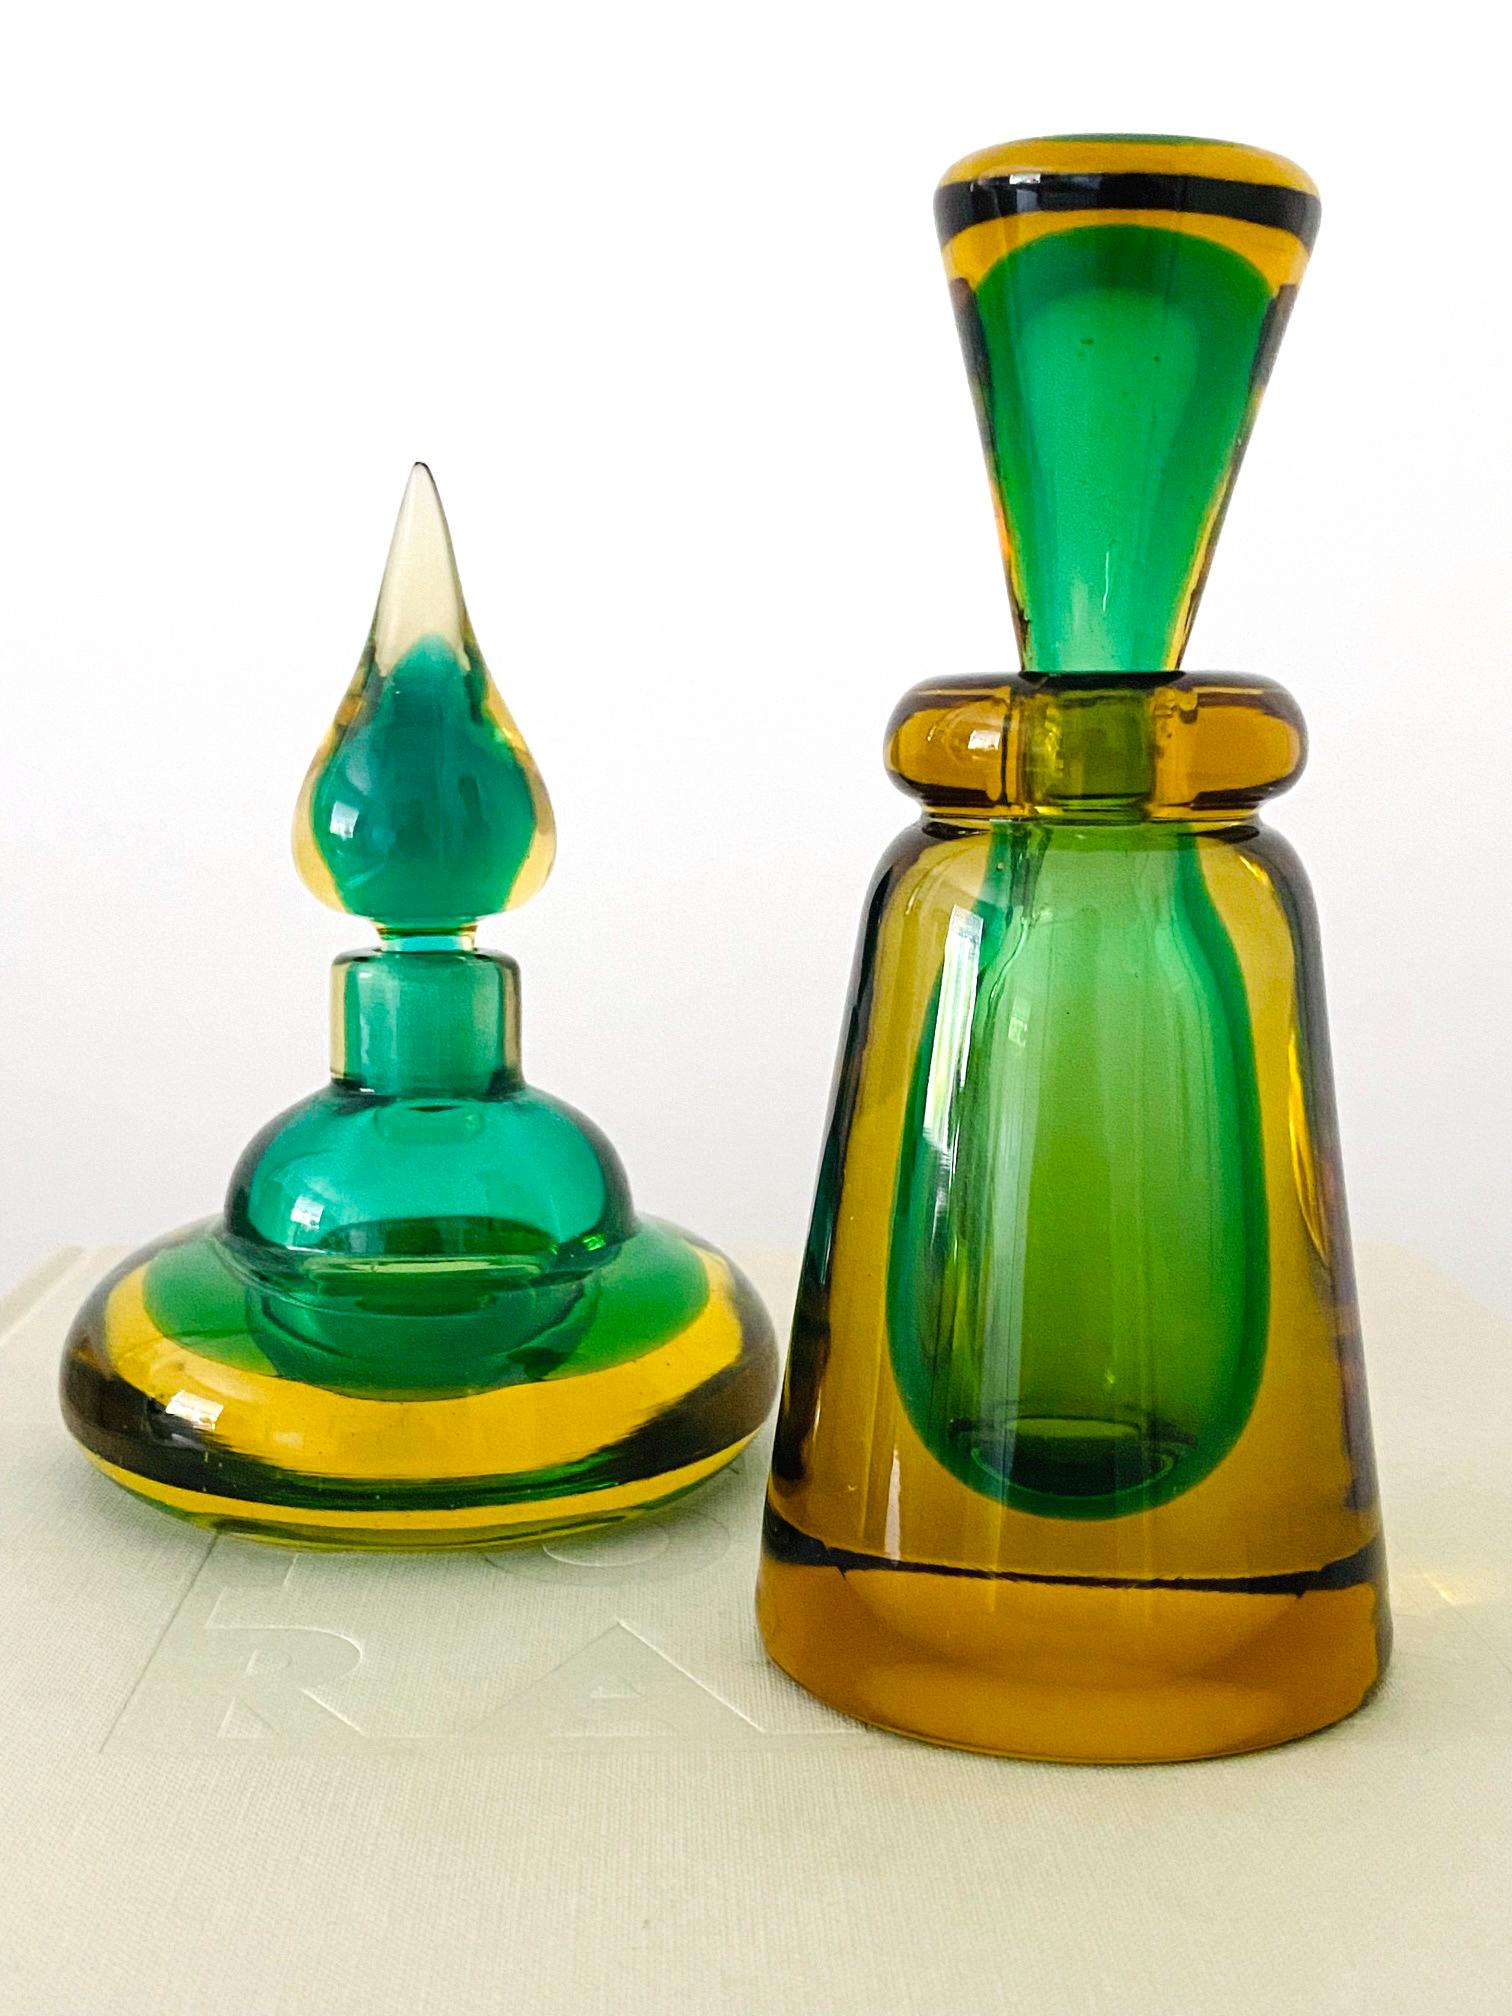 Mid-Century Modern Pair of Murano Glass Bottles in Green and Yellow by Flavio Poli, Italy, c. 1960